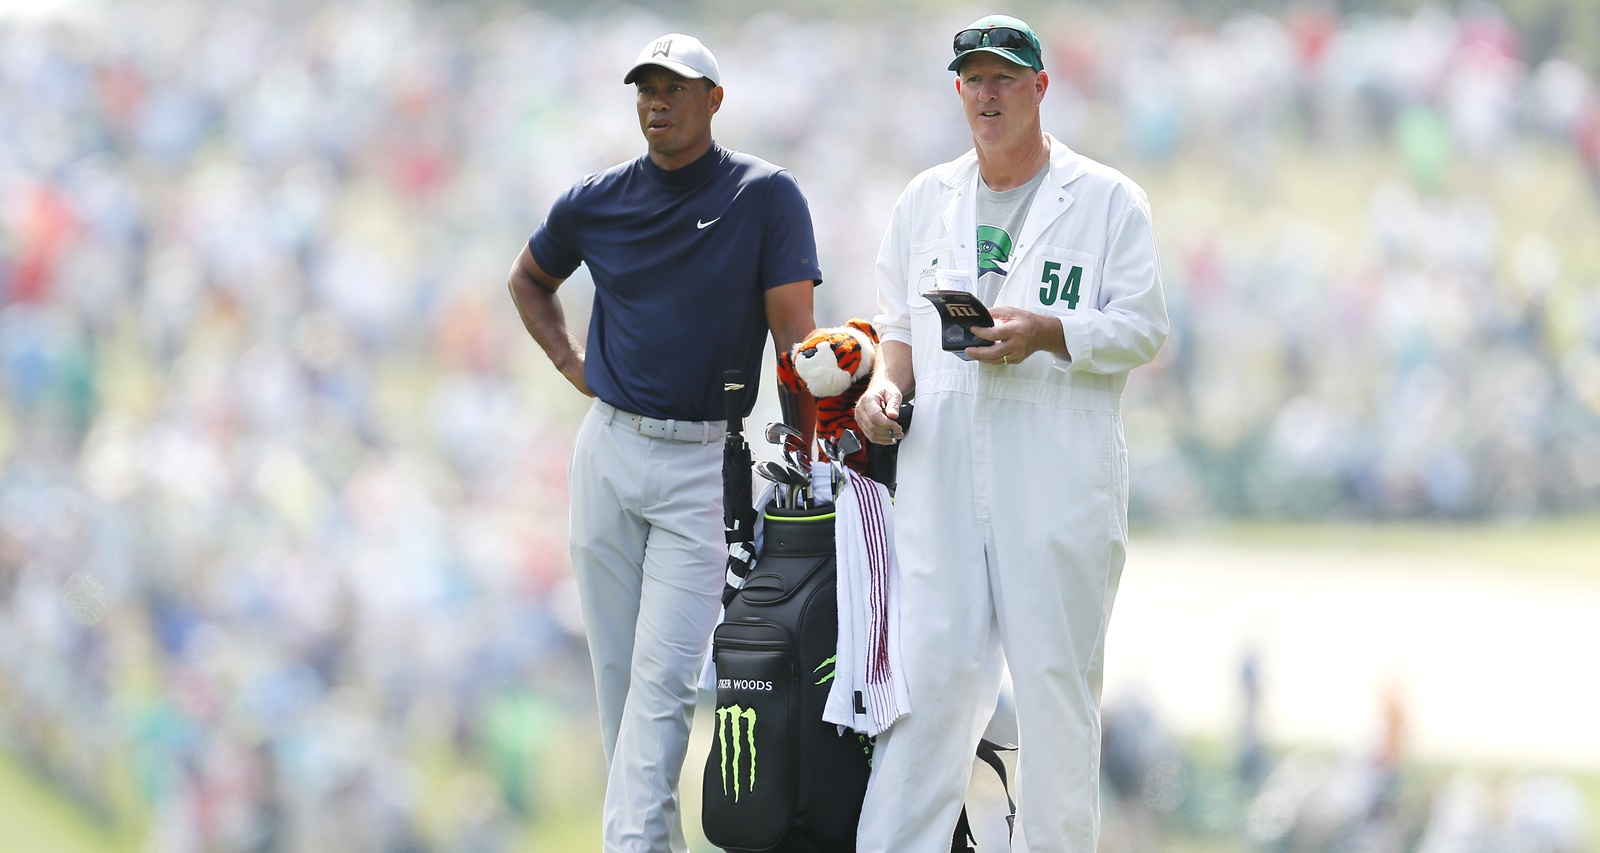 Tiger Woods’ Caddie, Joe LaCava Wiki, Net Worth, Family, Connecticut, Facts To Know